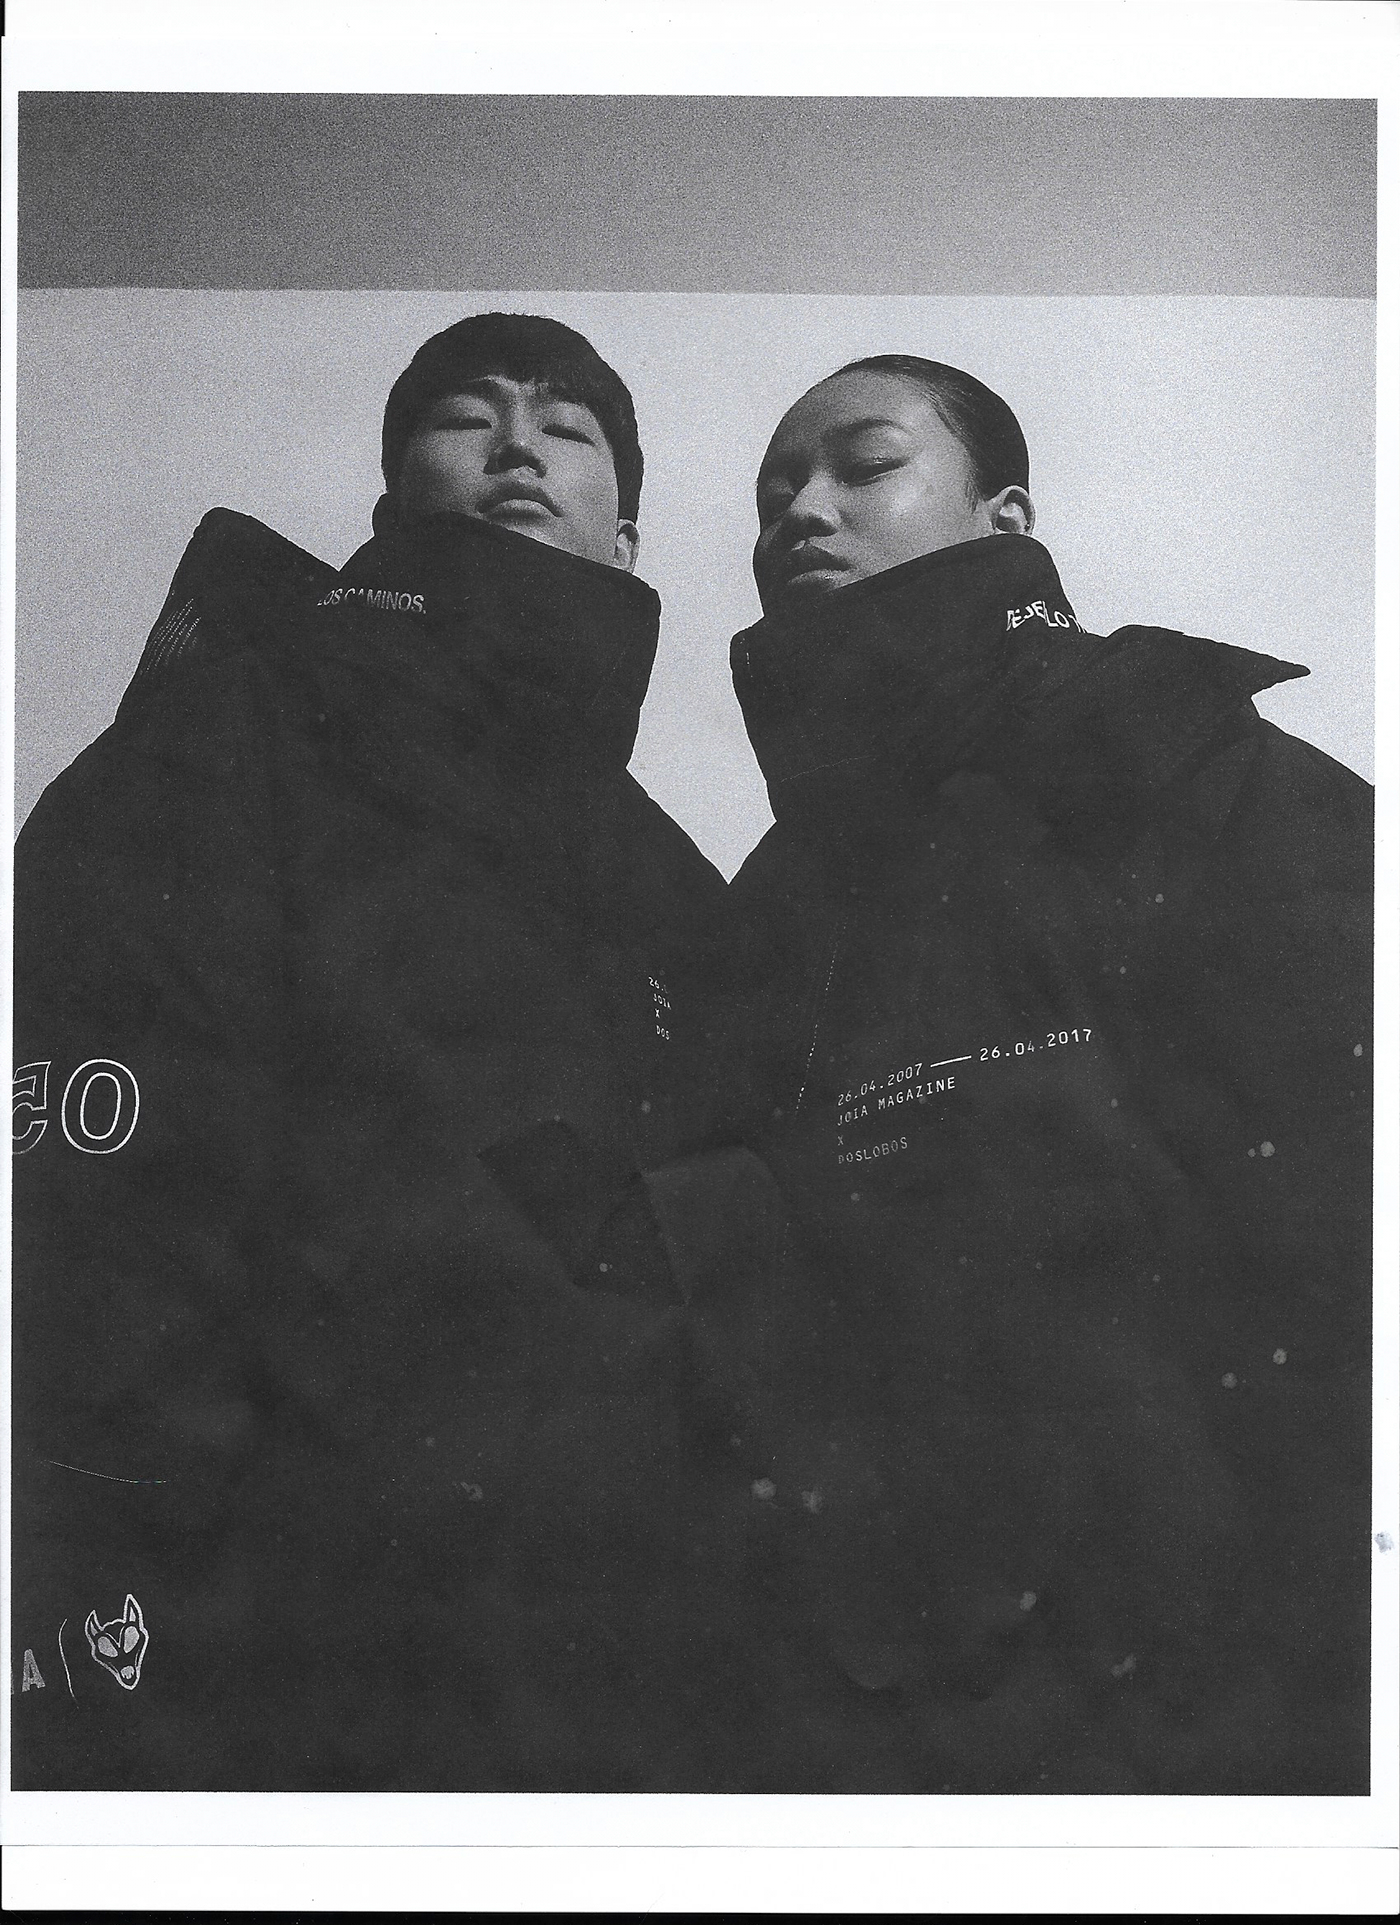 campaign asian chinese japan fashion served joia chile black and white print fanzine